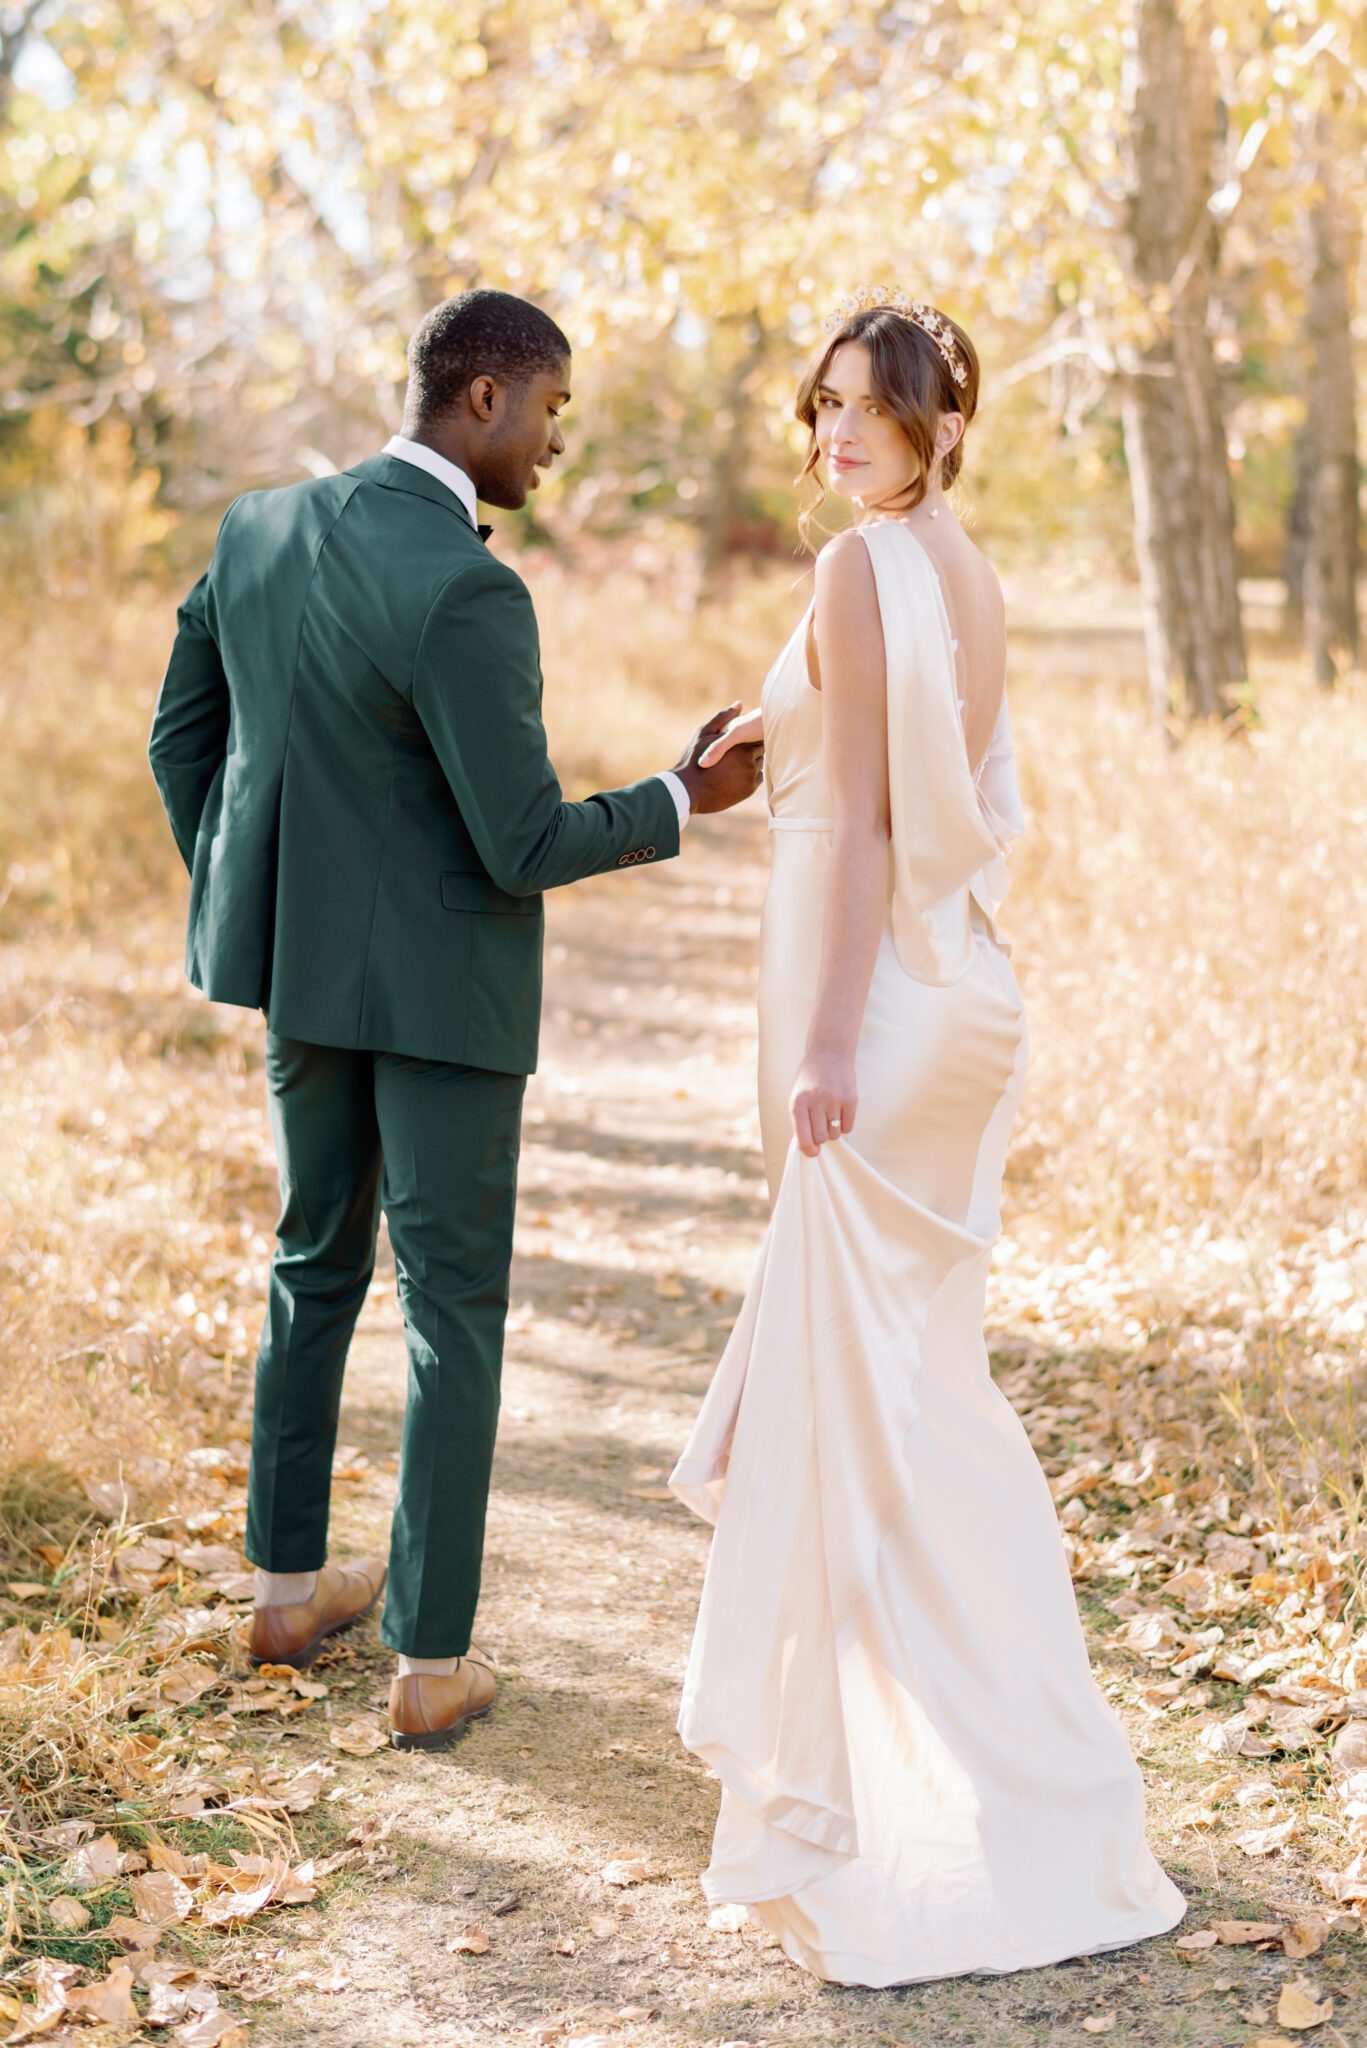 Couple walking at intimate Autumn wedding, groom wearing emerald green suit, and bride in elegant satin gown. 